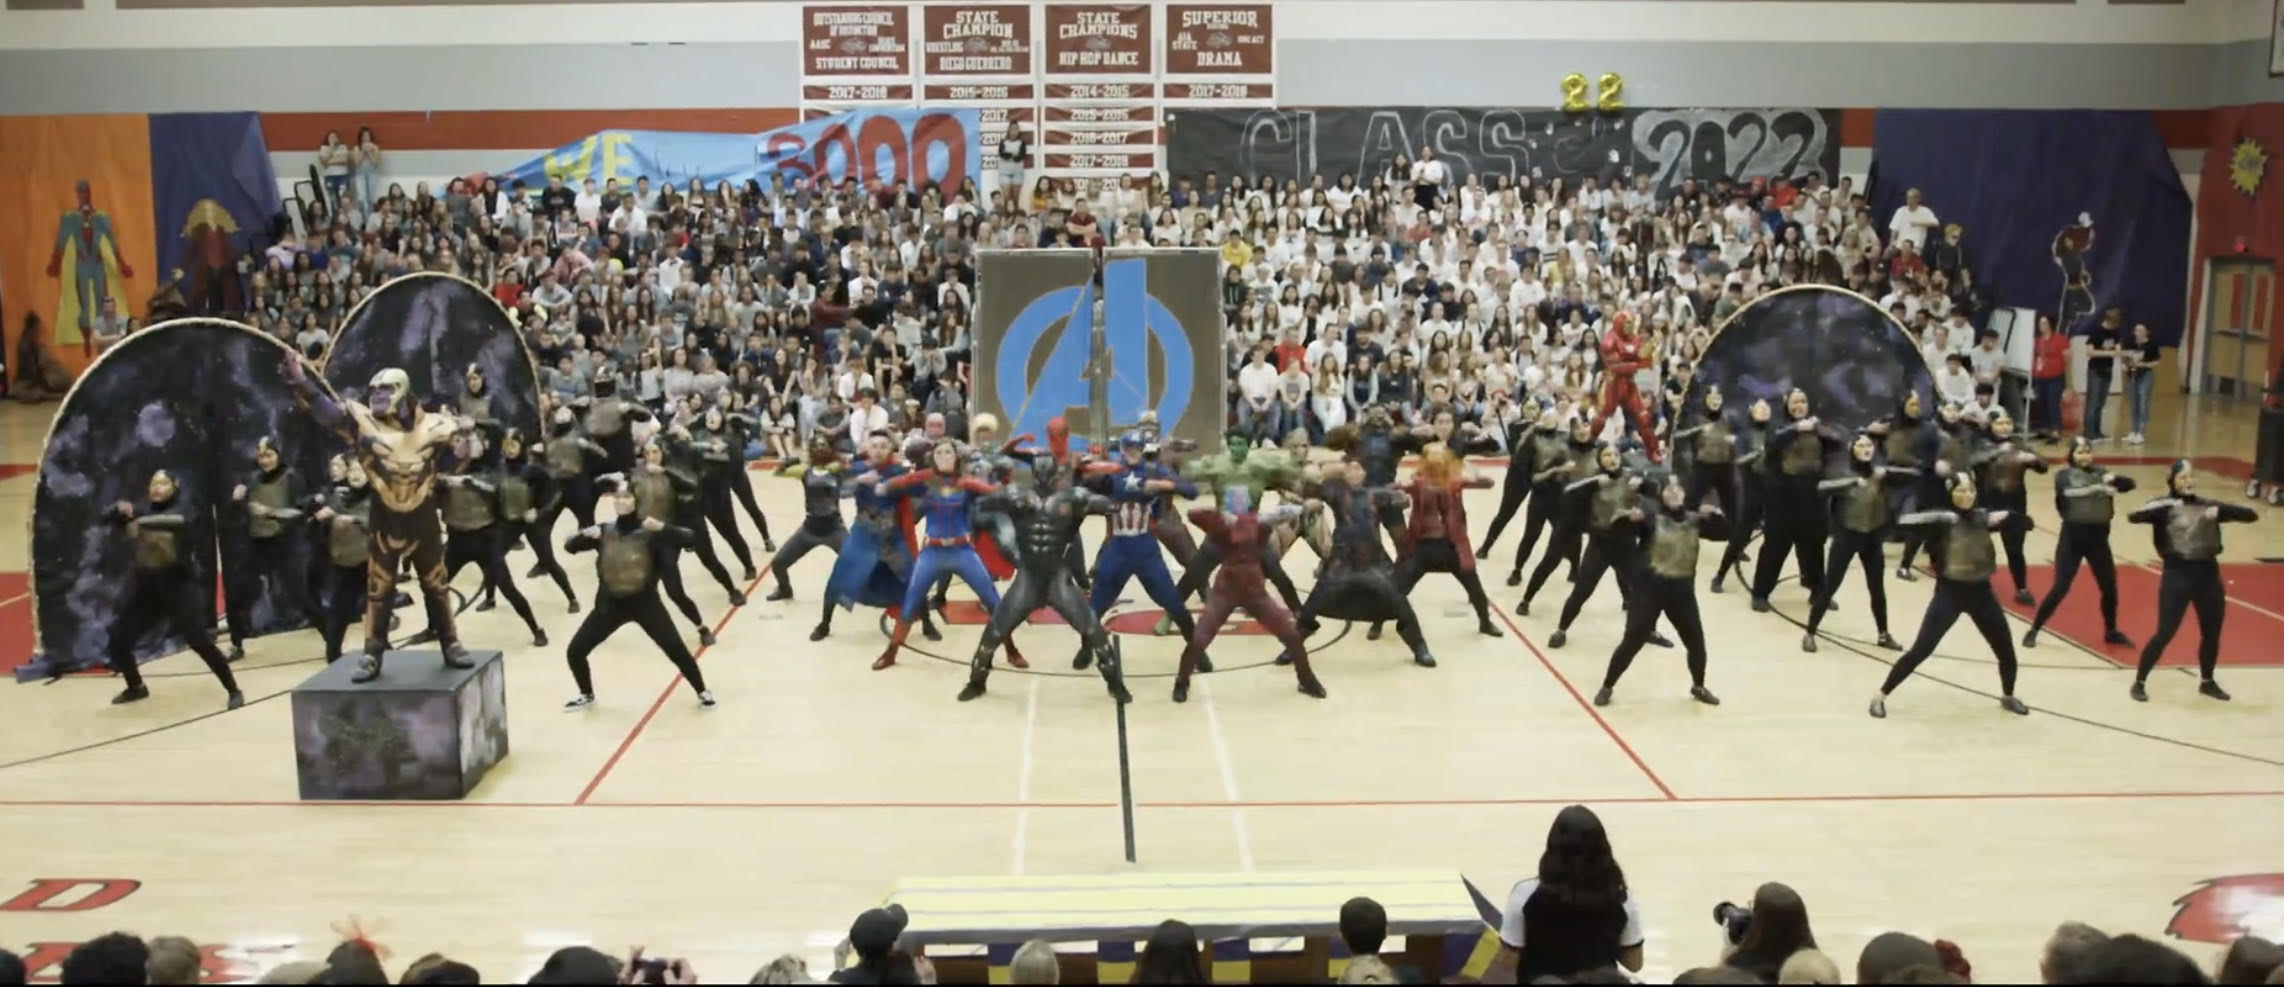 High School Dance Team Performs Avengers ‘Infinity War’ and ‘Endgame’ for Homecoming Assembly Dance